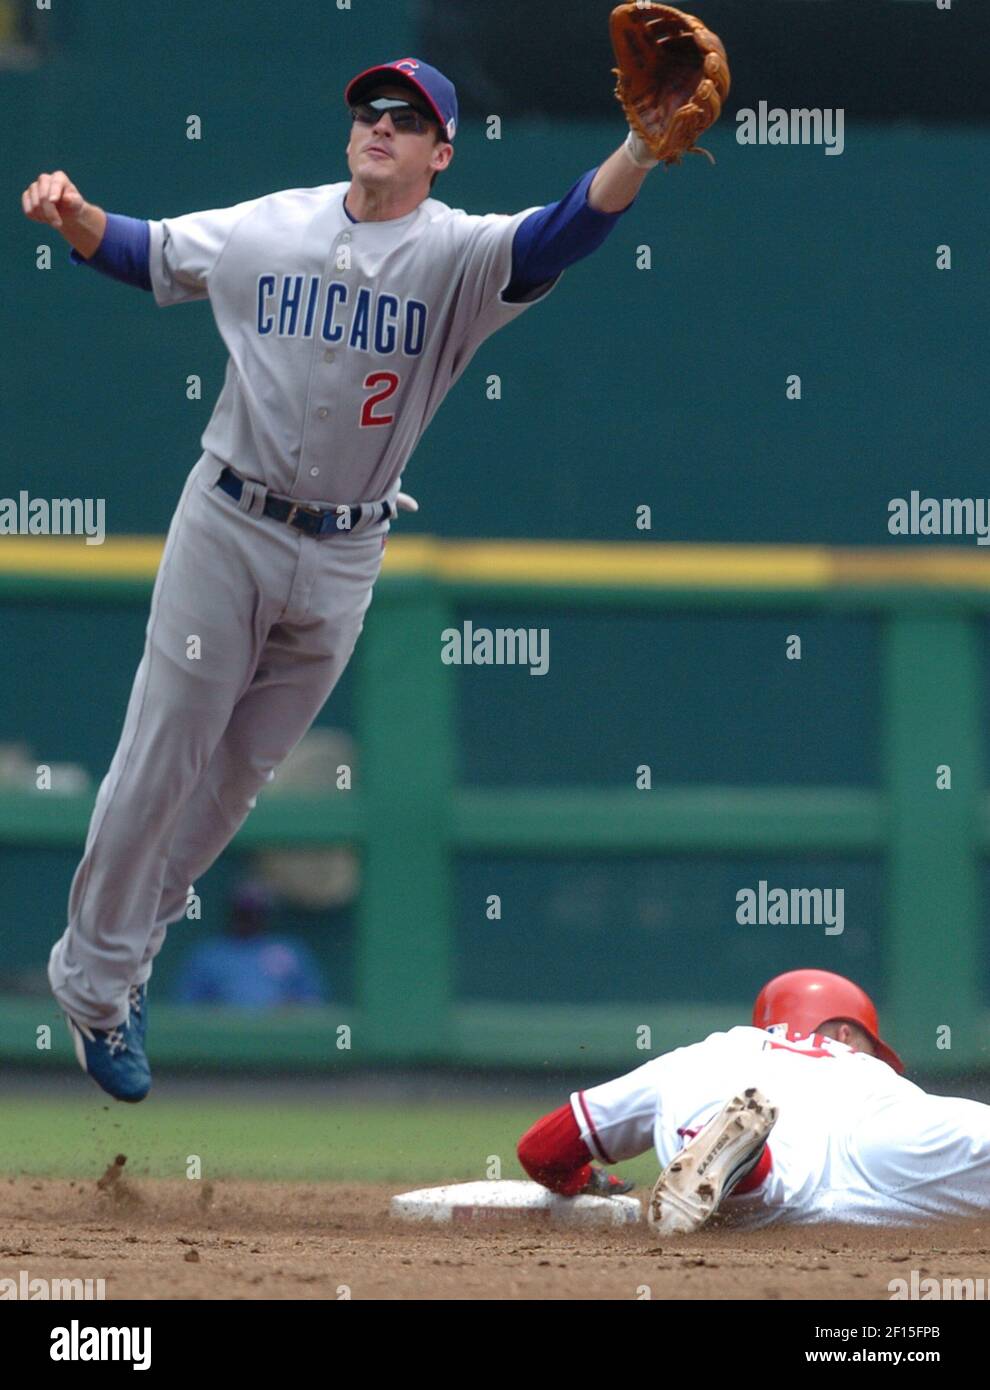 Chicago Cubs shortstop Ryan Theriot (2) can't reach a high throw